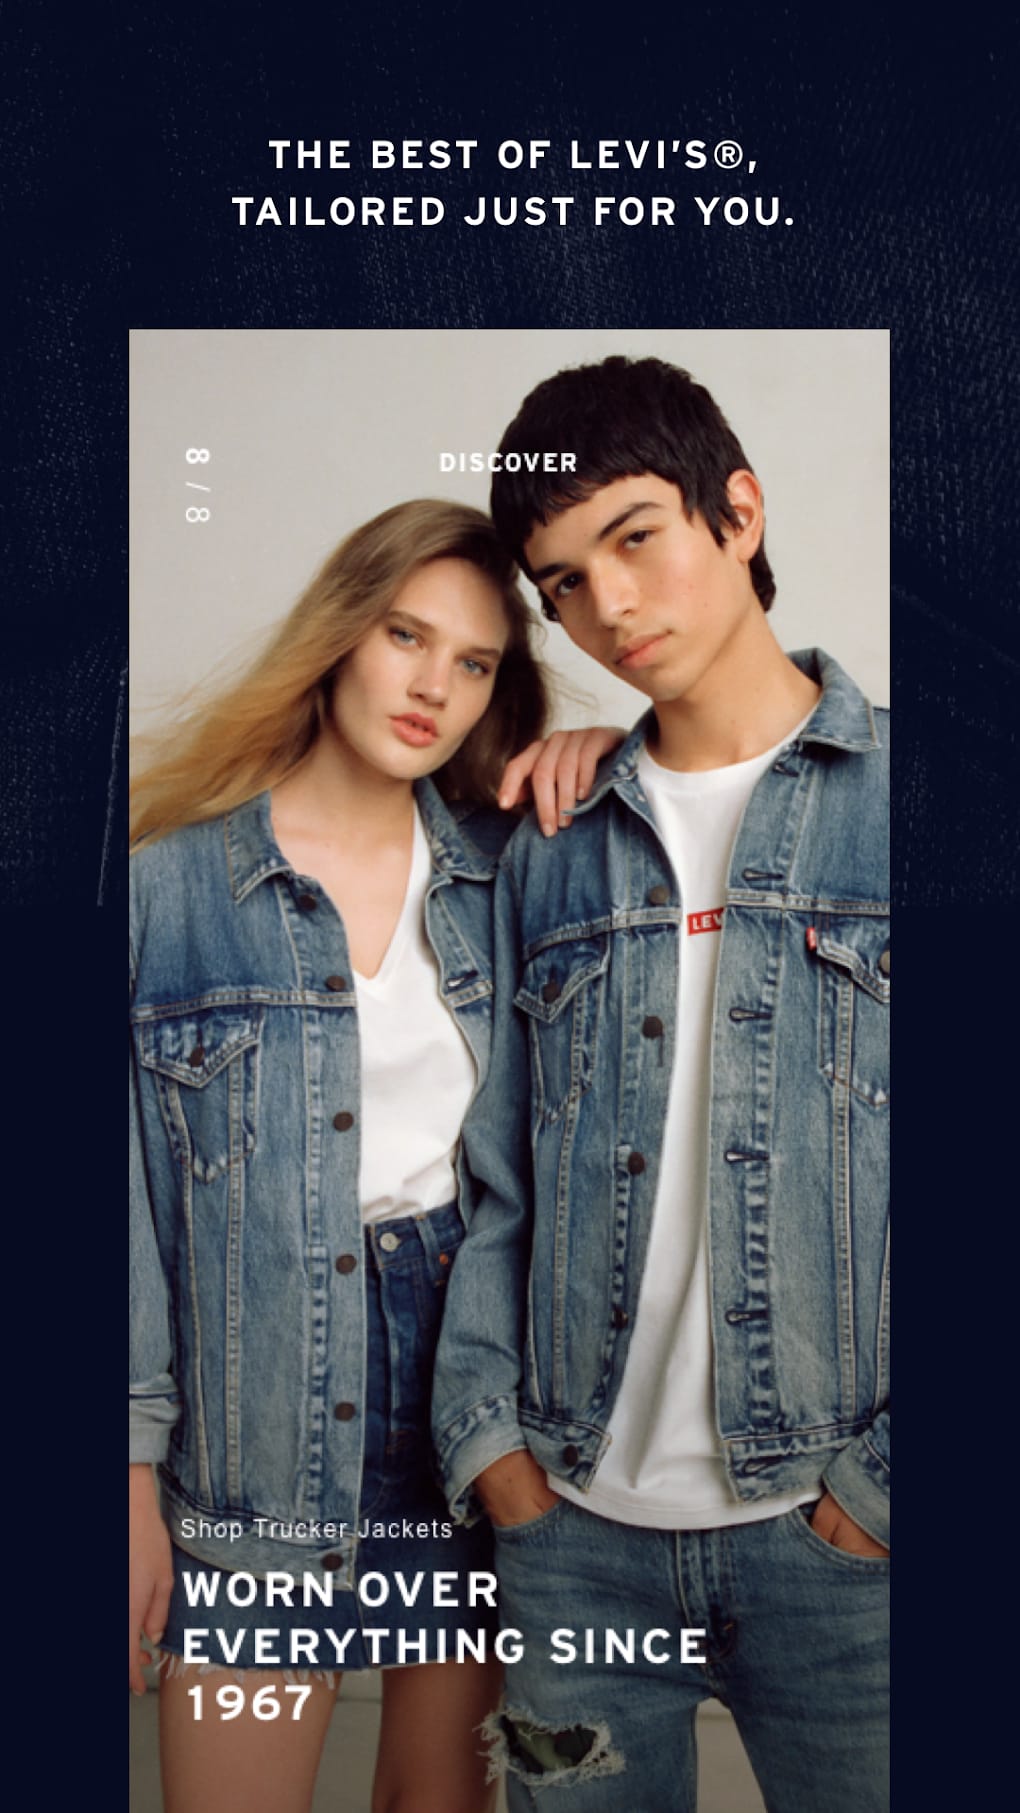 Levis for Android - Download